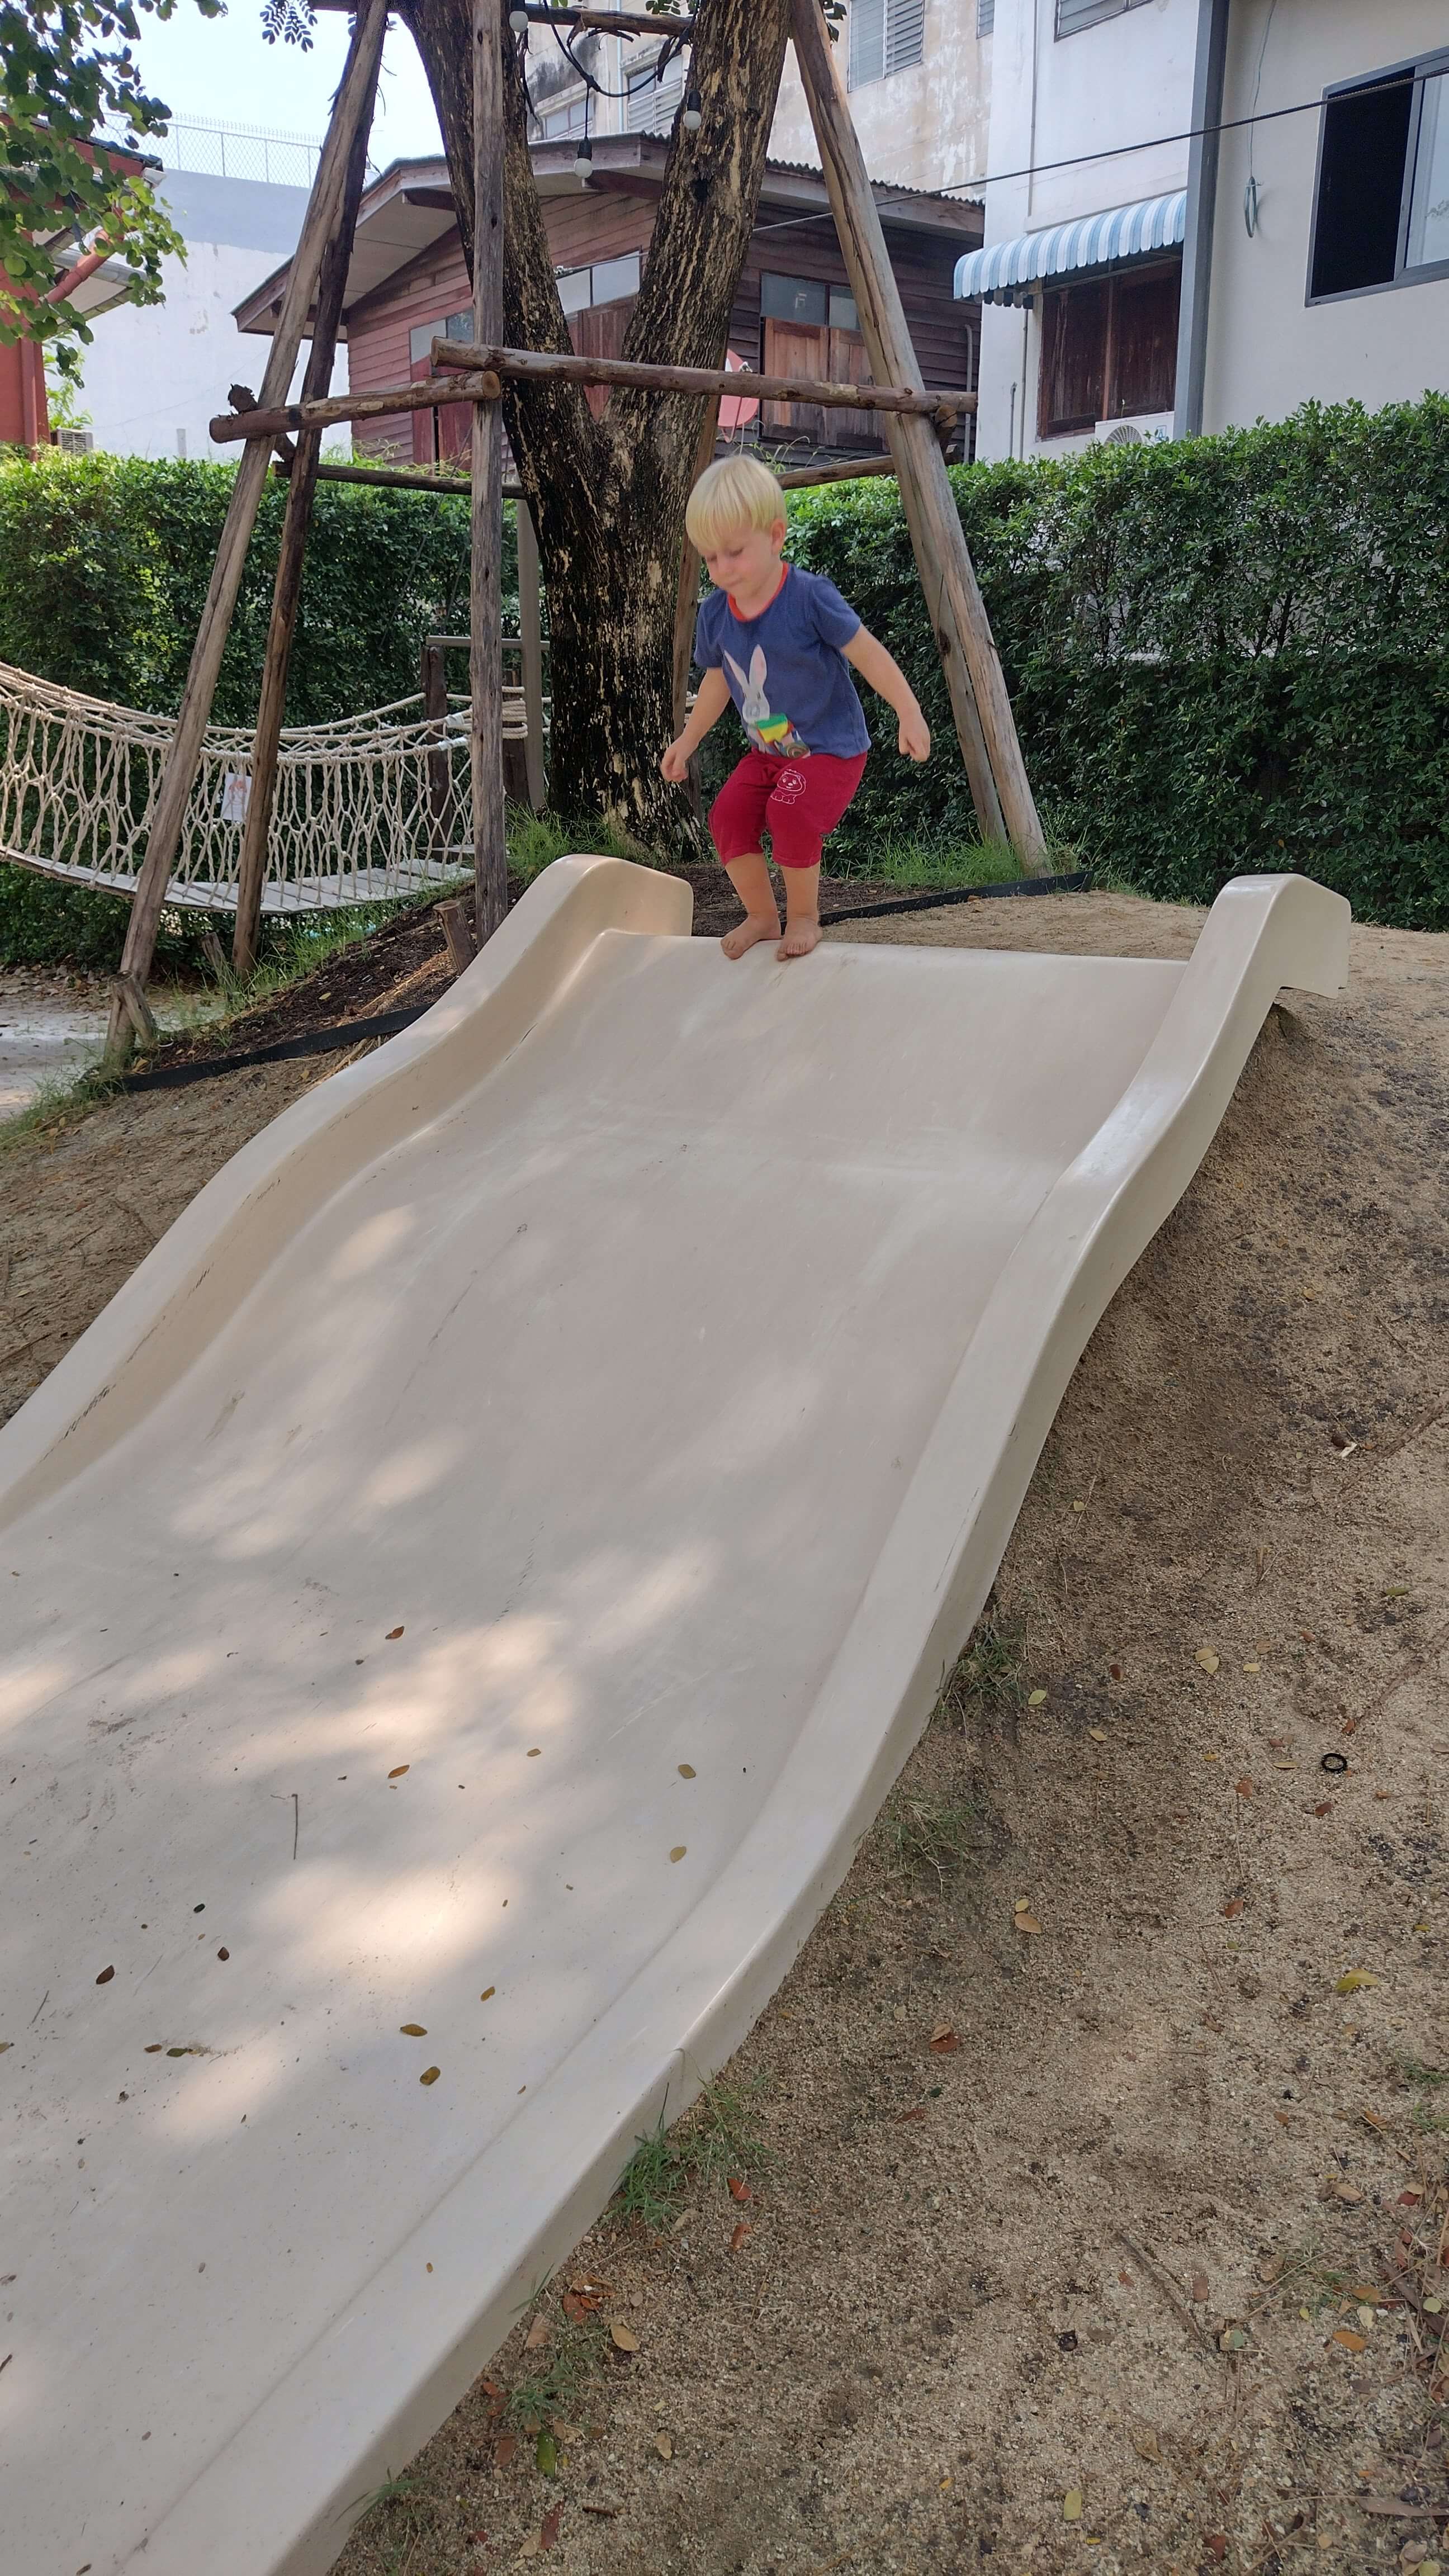 A White toddler playing on a slide at an outdoor cafe